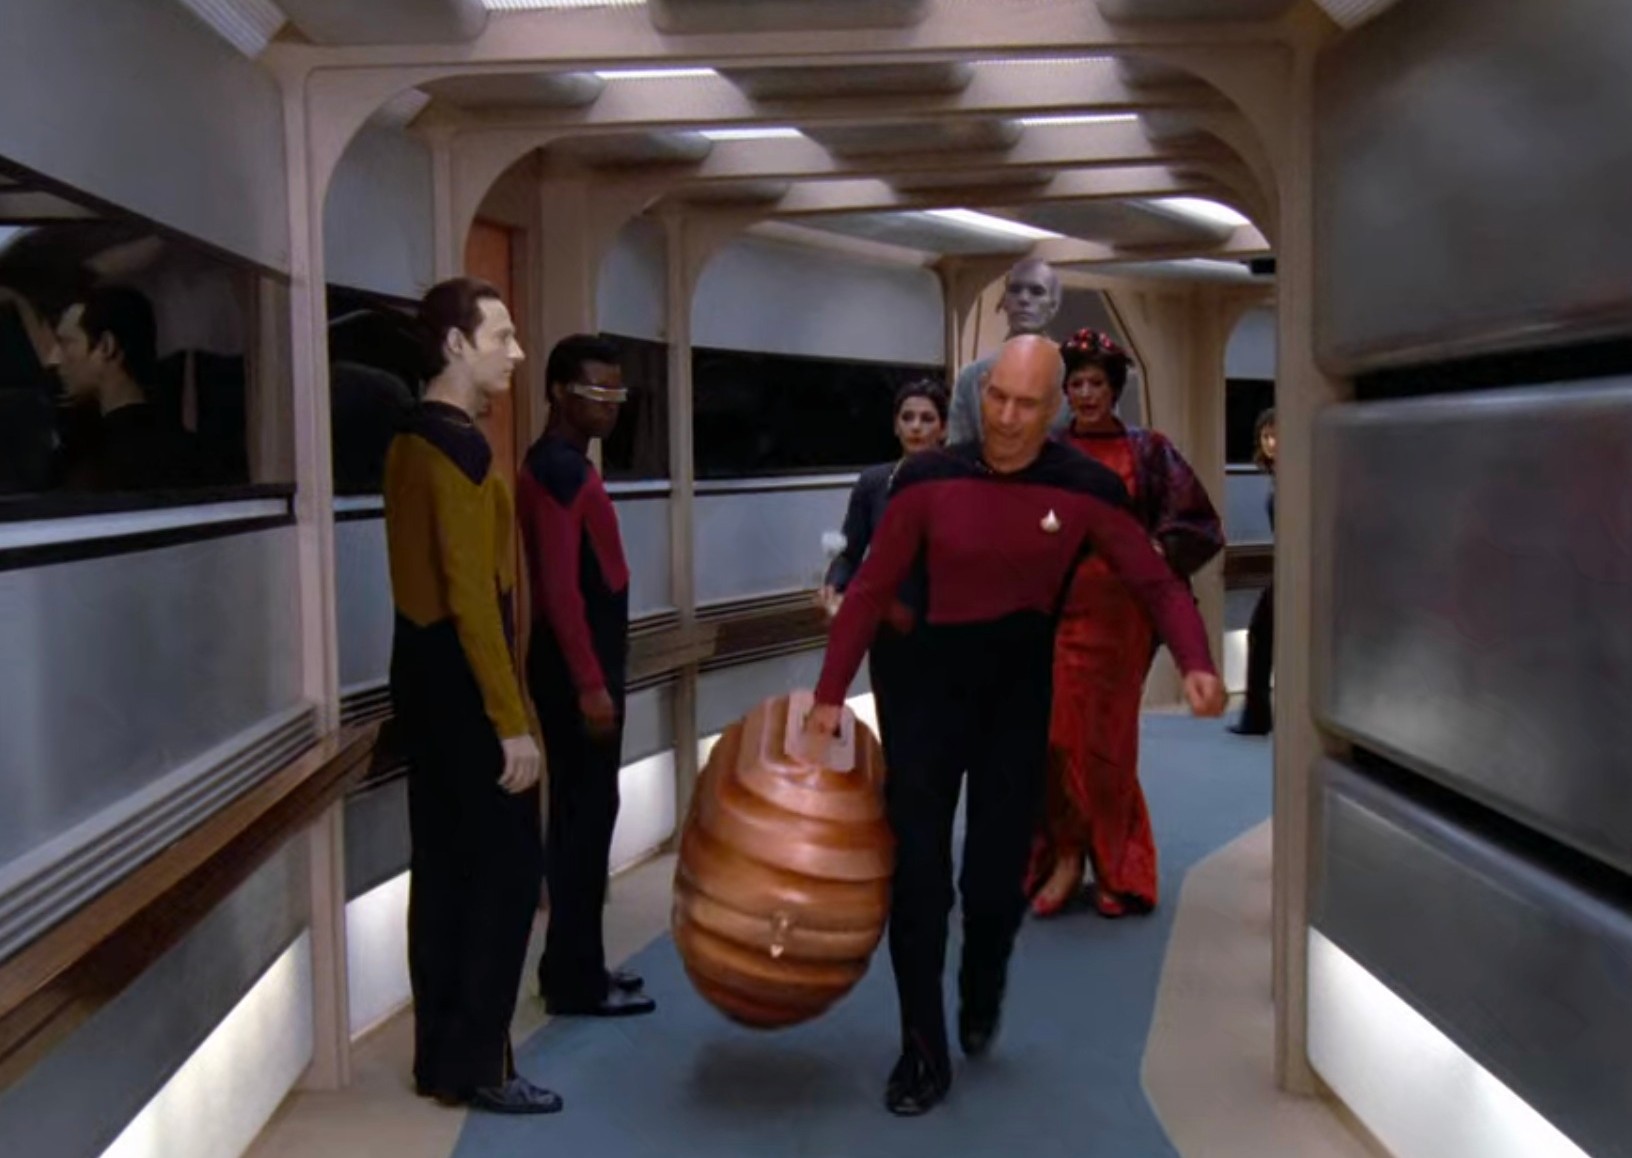 Captain Picard carries a big, futuristic suitcase through the hallway of the starship Enterprisedic